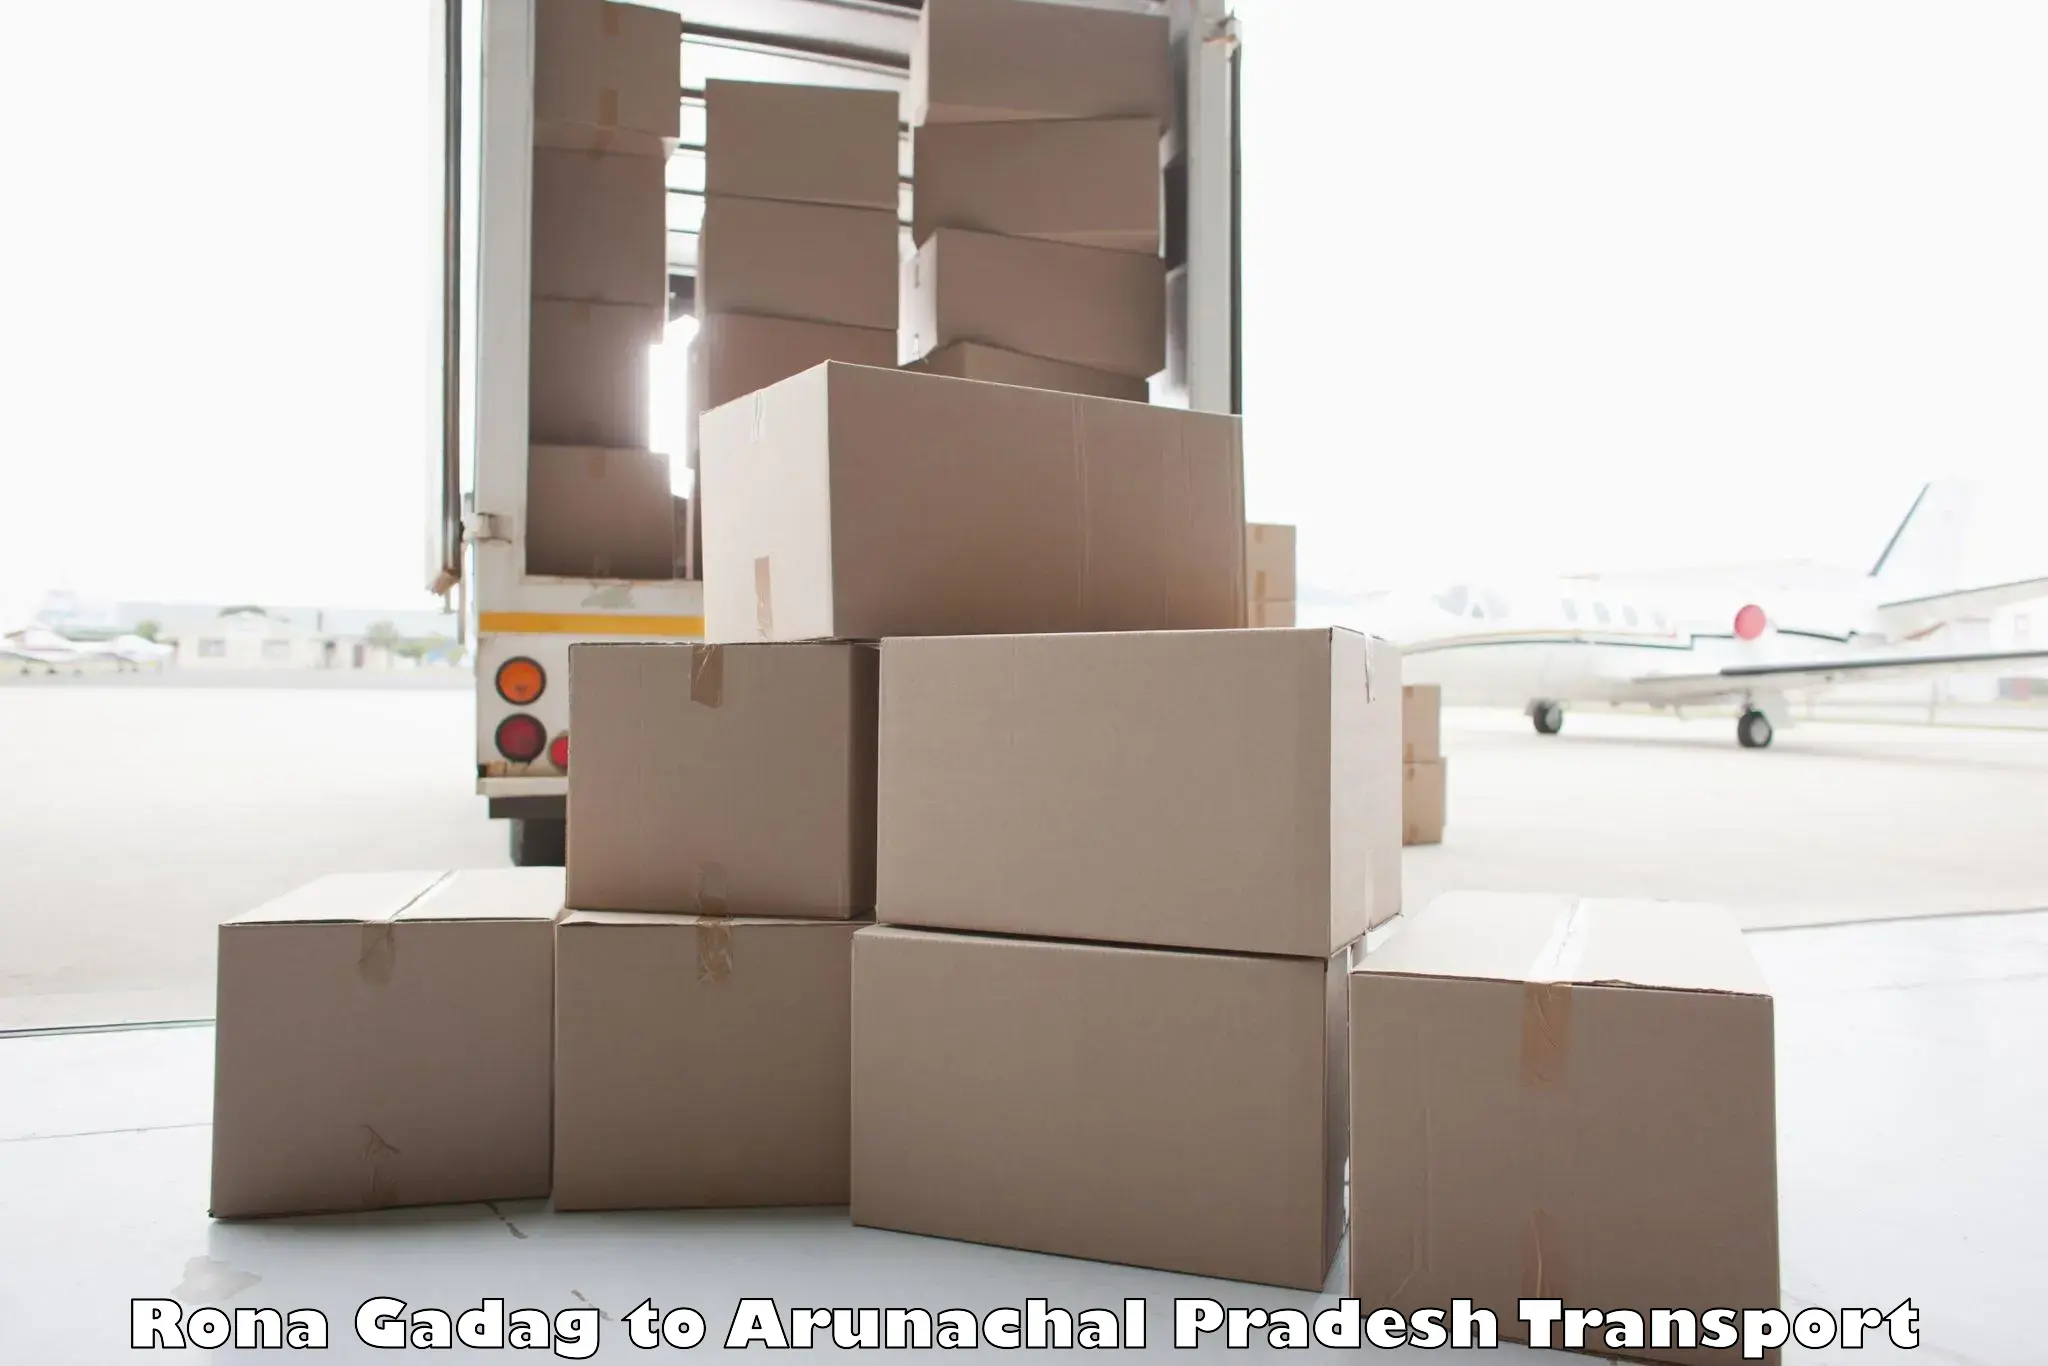 Parcel transport services in Rona Gadag to Deomali